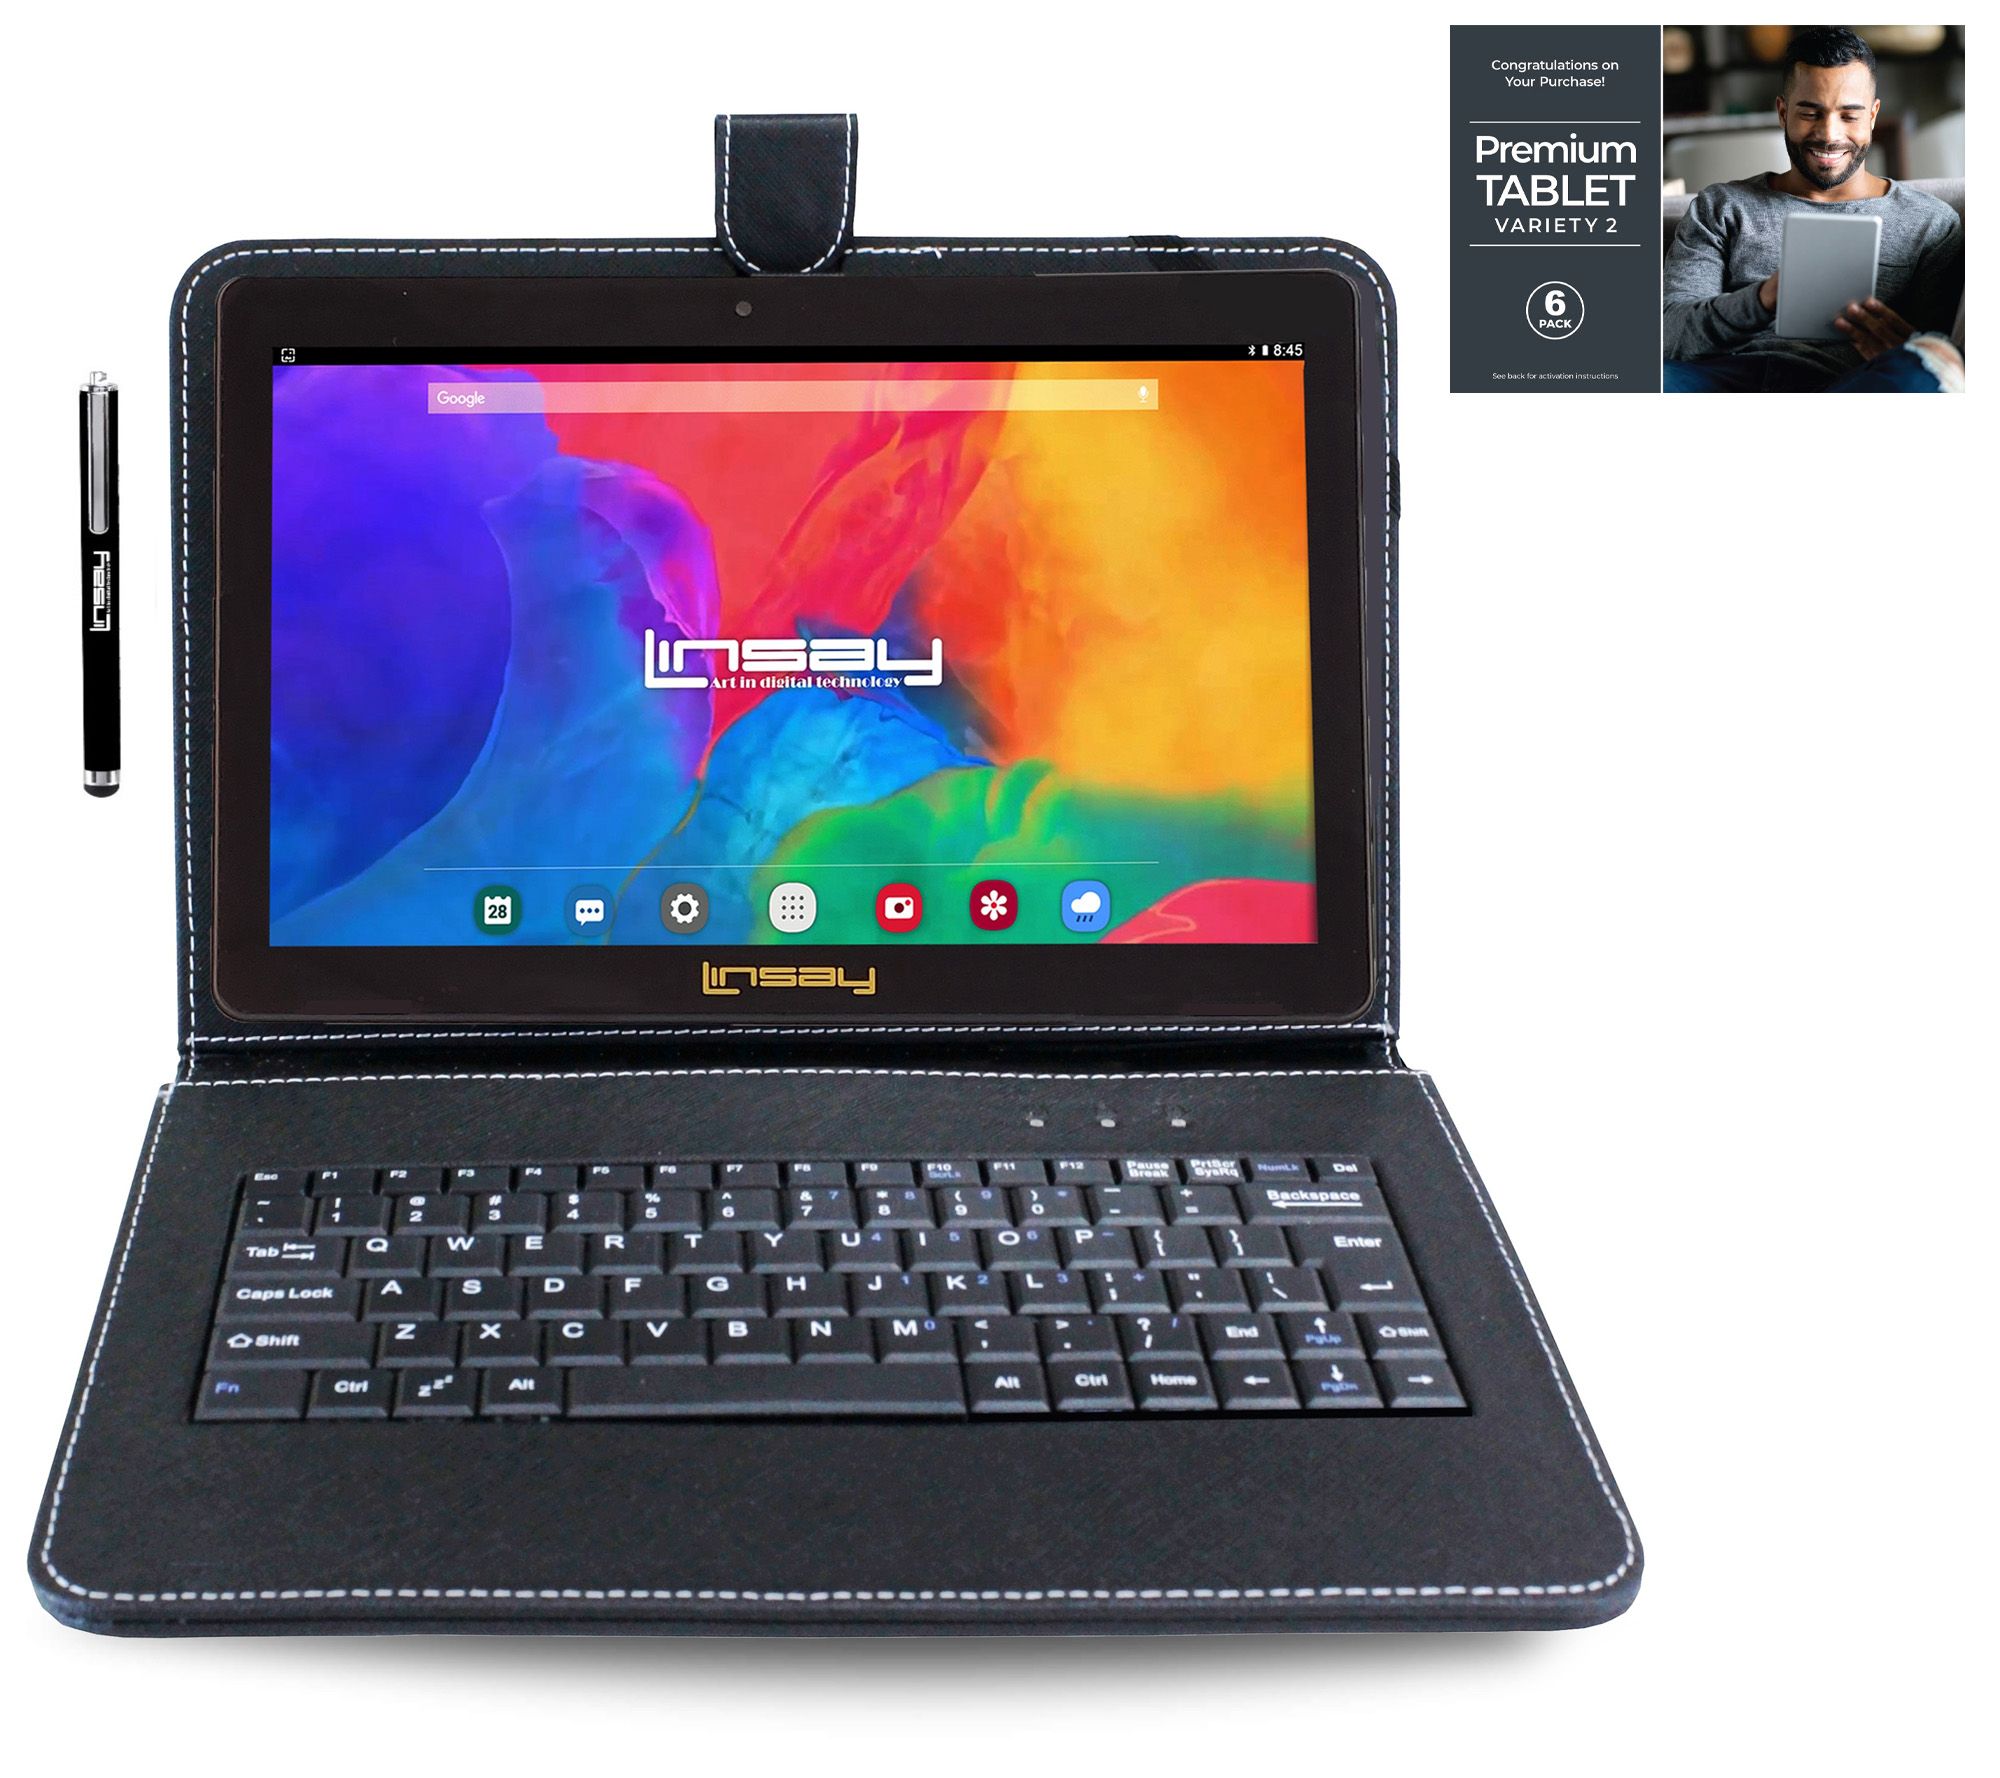 64gb android tablet